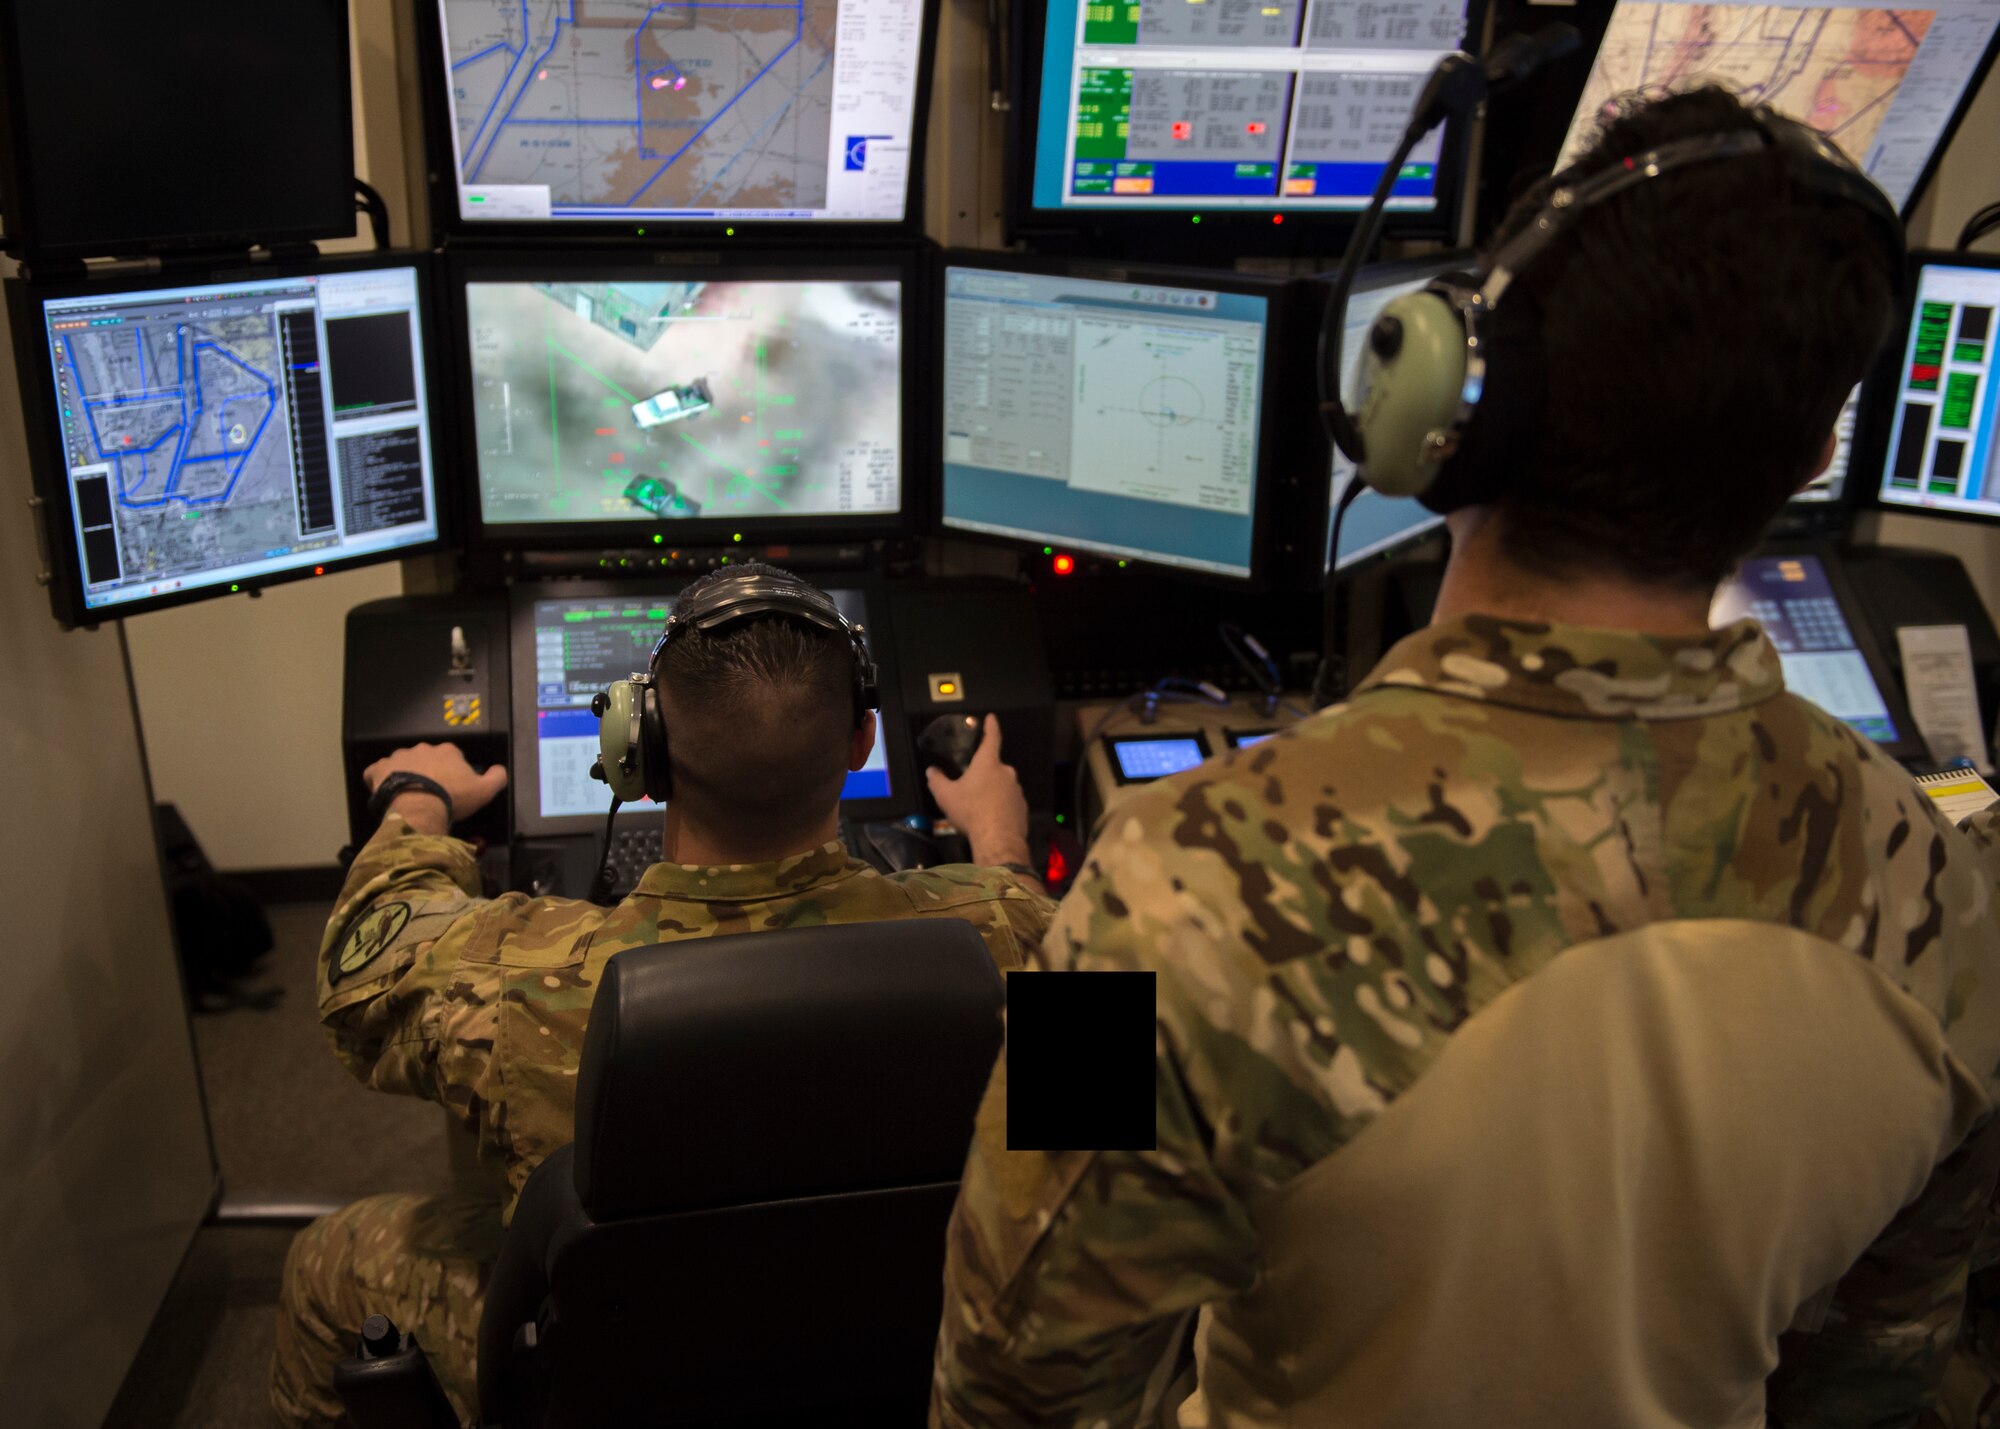 1st Lt. Aleksandr, 351st Special Warfare Training Squadron combat rescue officer student, observes a simulated exercise, March 13, 2019, at the 16th Training Squadron on Holloman Air Force Base, N.M. The MQ-9 is an armed, multi-mission remotely piloted aircraft that is employed primarily against execution targets and secondarily as an intelligence collection asset. Last names have been withheld due to operational security restraints. (U.S. Air Force photo by Airman 1st Class Kindra Stewart)